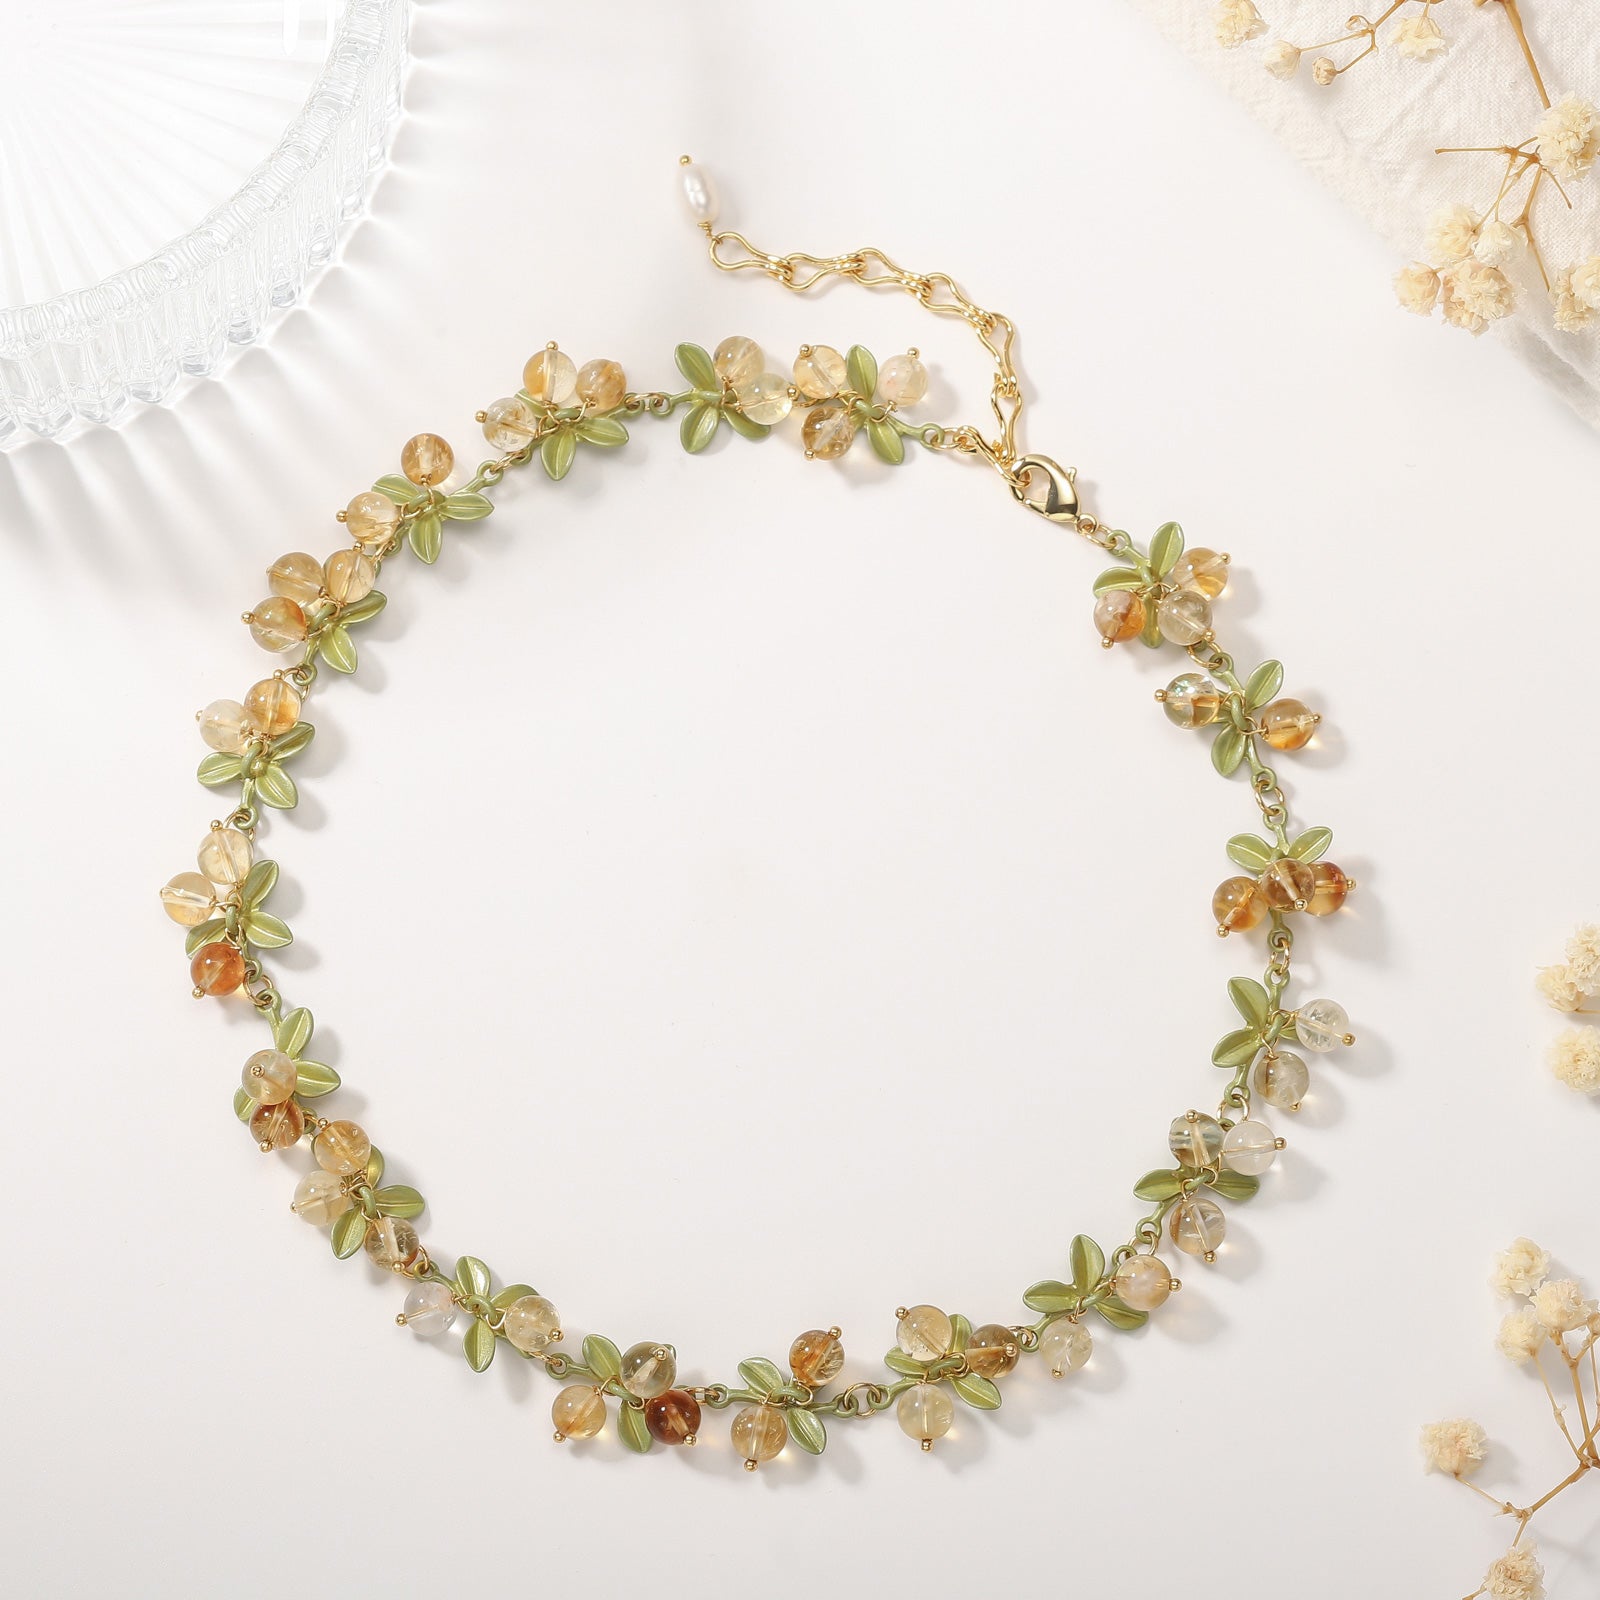 Gooseberry Necklace Orchard Jewelry